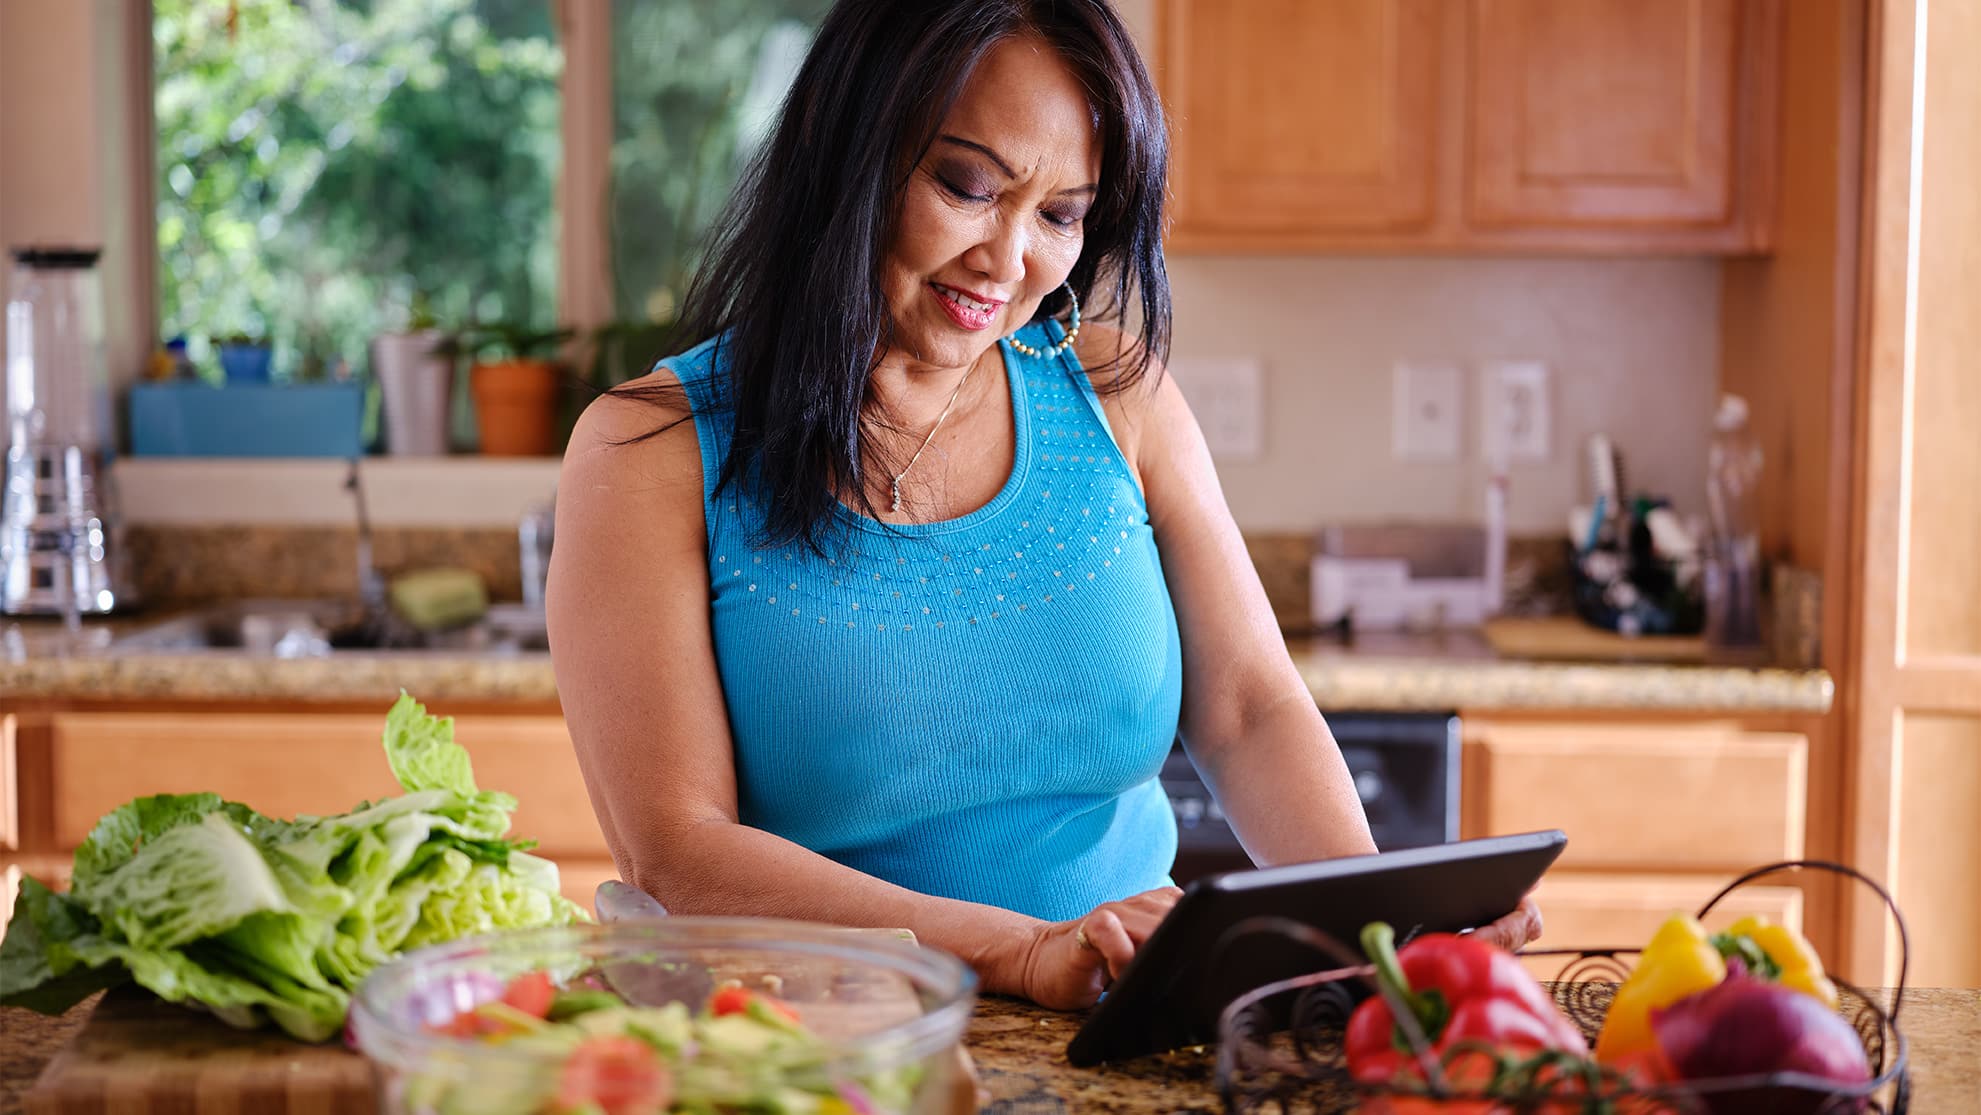 older adult with hispanic or mexican heritage in her kitchen looking at an ipan. On the counter, healthy vegetables can be seen, as well as, a basket with peppers inside.